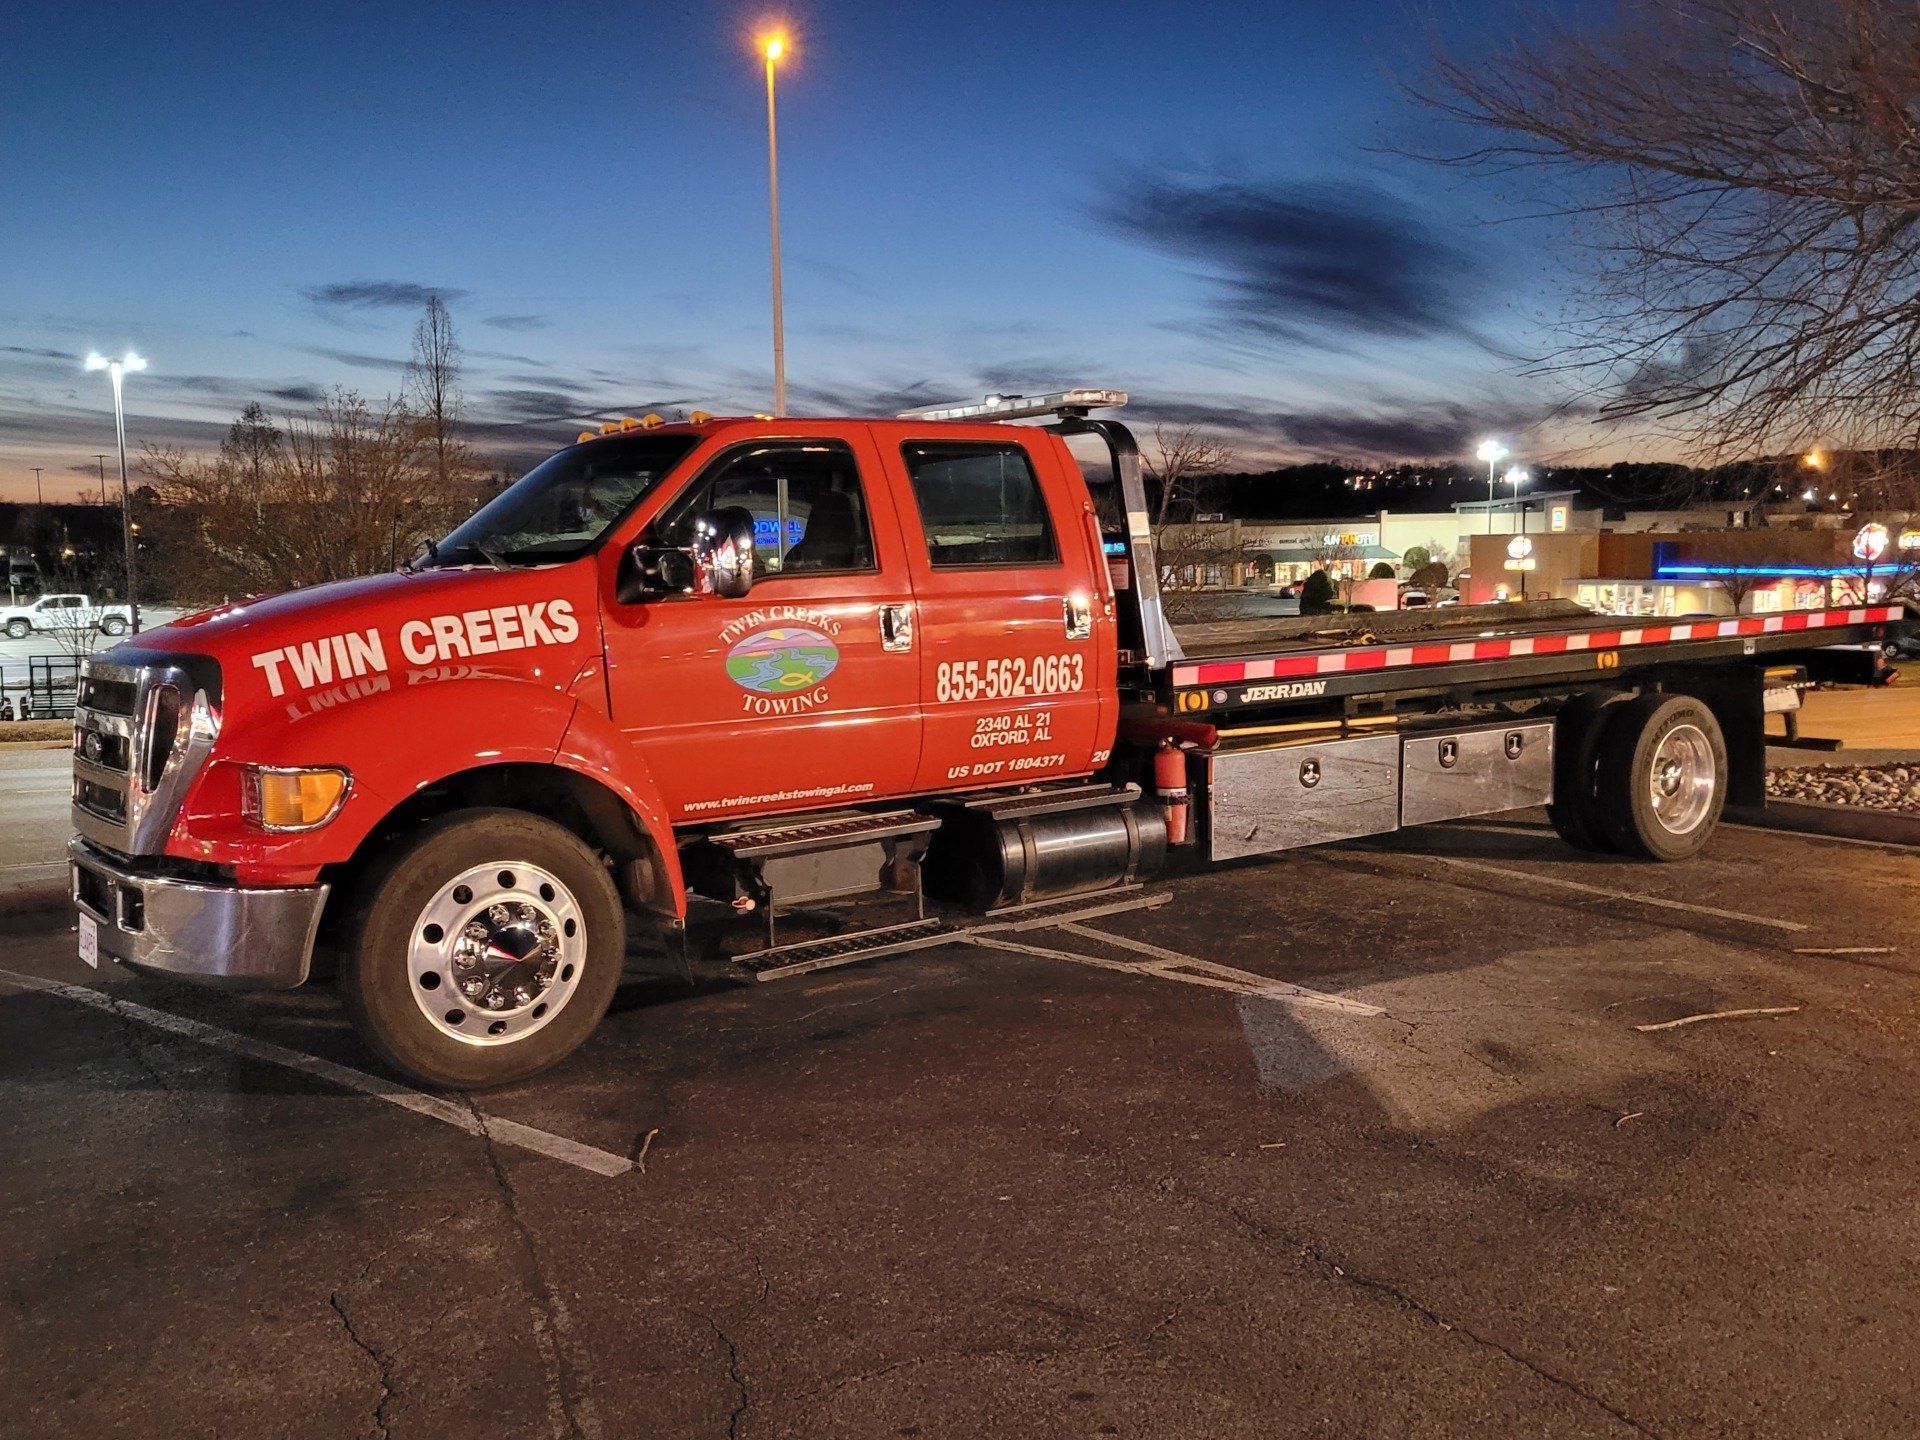 twin creeks towing Lincoln (855)562-0663